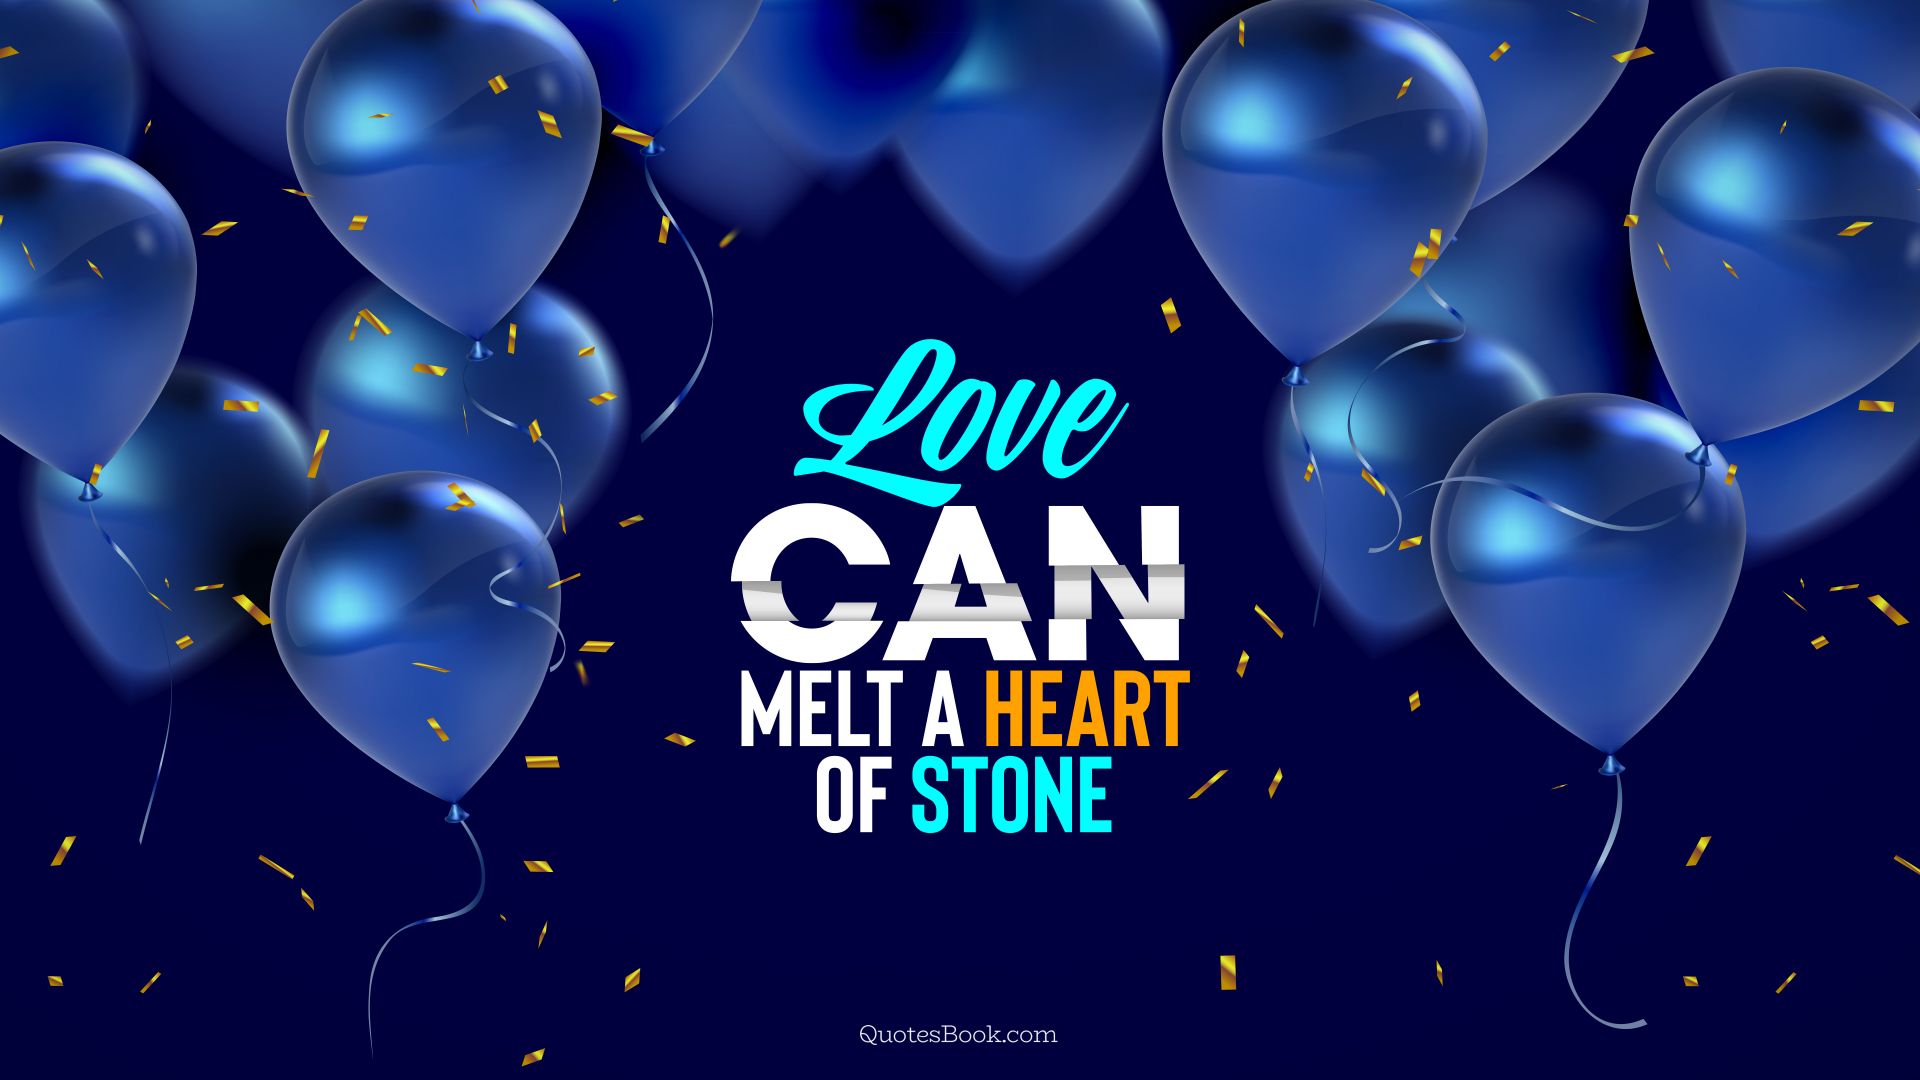 Love can melt a heart of stone. - Quote by QuotesBook